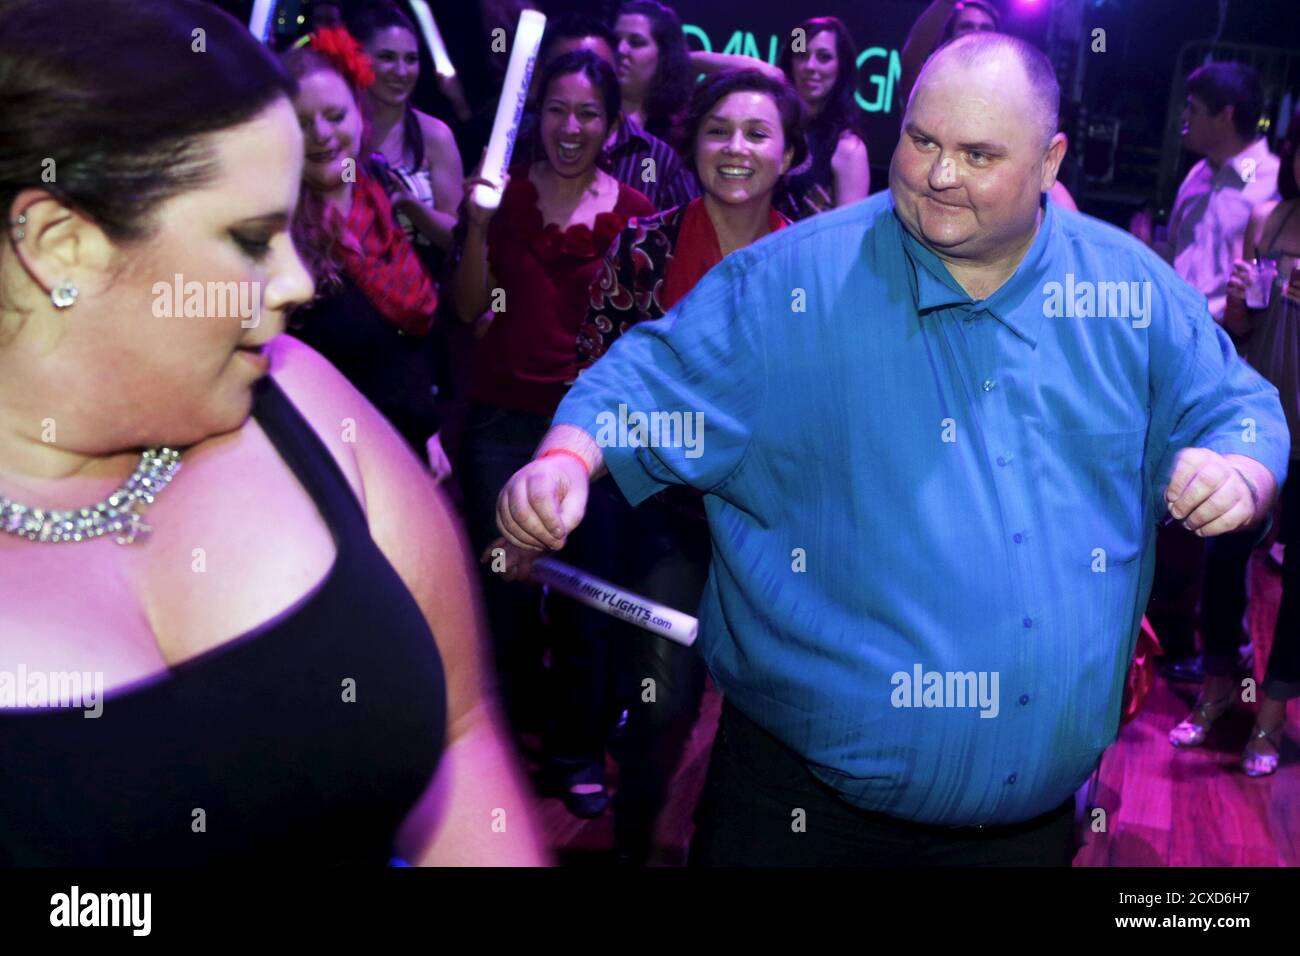 Television personality Whitney Thore and 'Dancing Man' Sean O'Brien dance at the #IAmDancingMan party at the Avalon Hollywood in Los Angeles, California May 23, 2015. O'Brien became a viral sensation in March after an internet user posted a photo intending to mock him that instead turned him into a hero for anti-bullying. REUTERS/Jonathan Alcorn Stock Photo